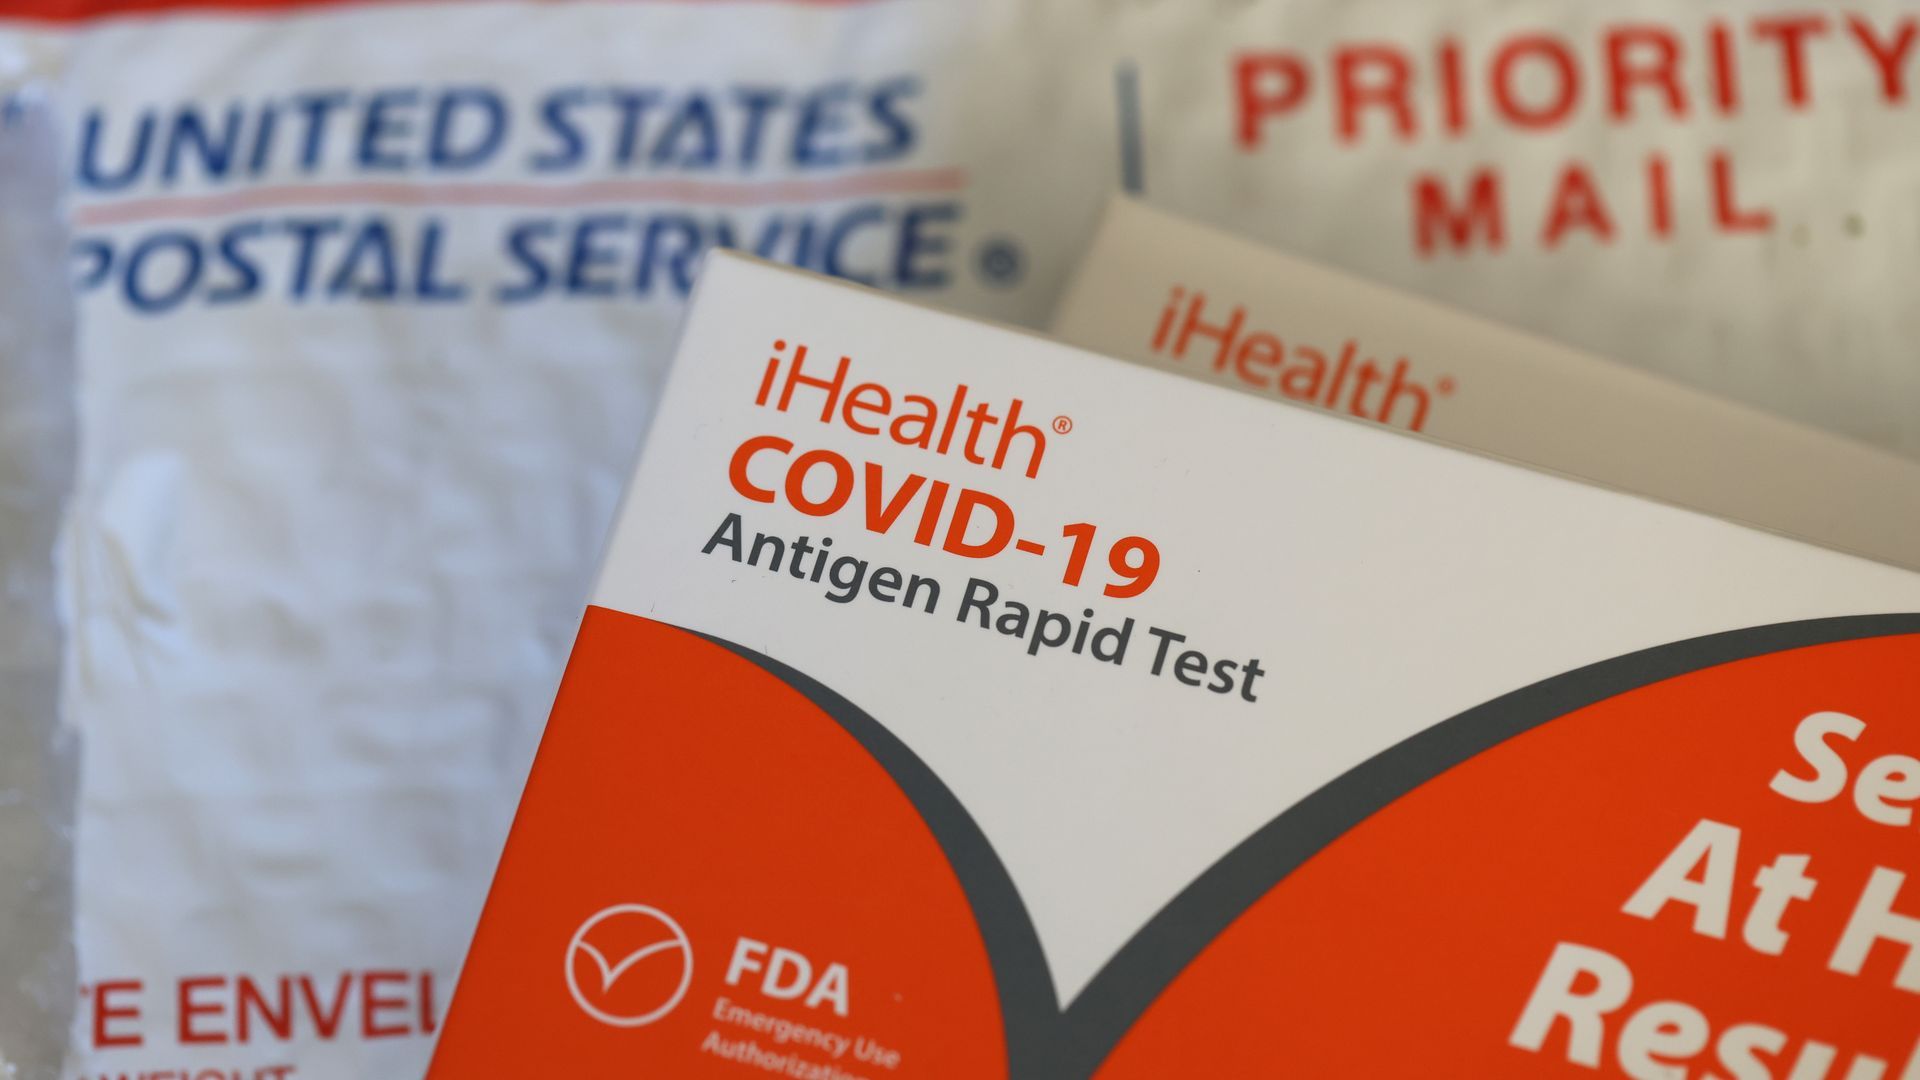 COVID test kits available to order for free from U.S. government